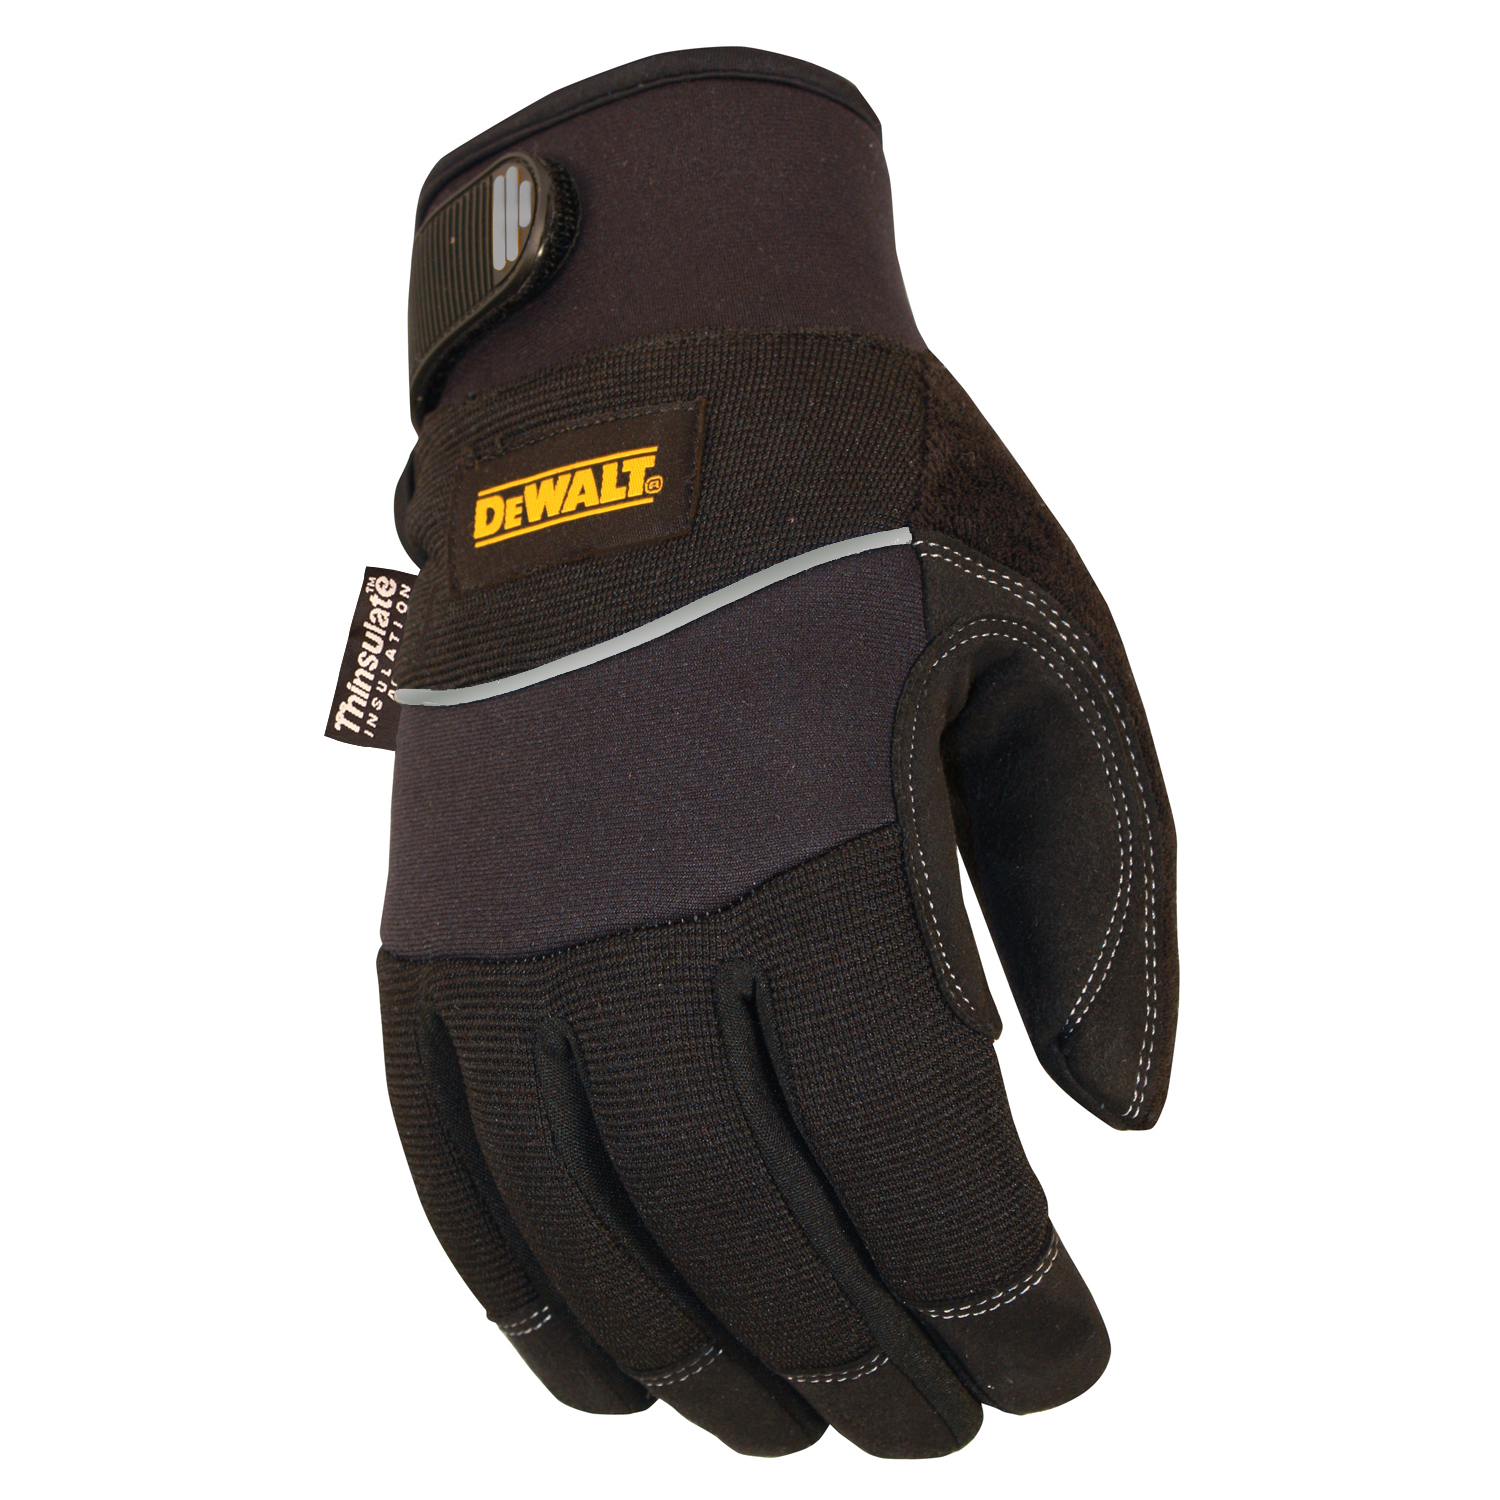 DPG755 Insulated Harsh Condition Work Glove - Size XL